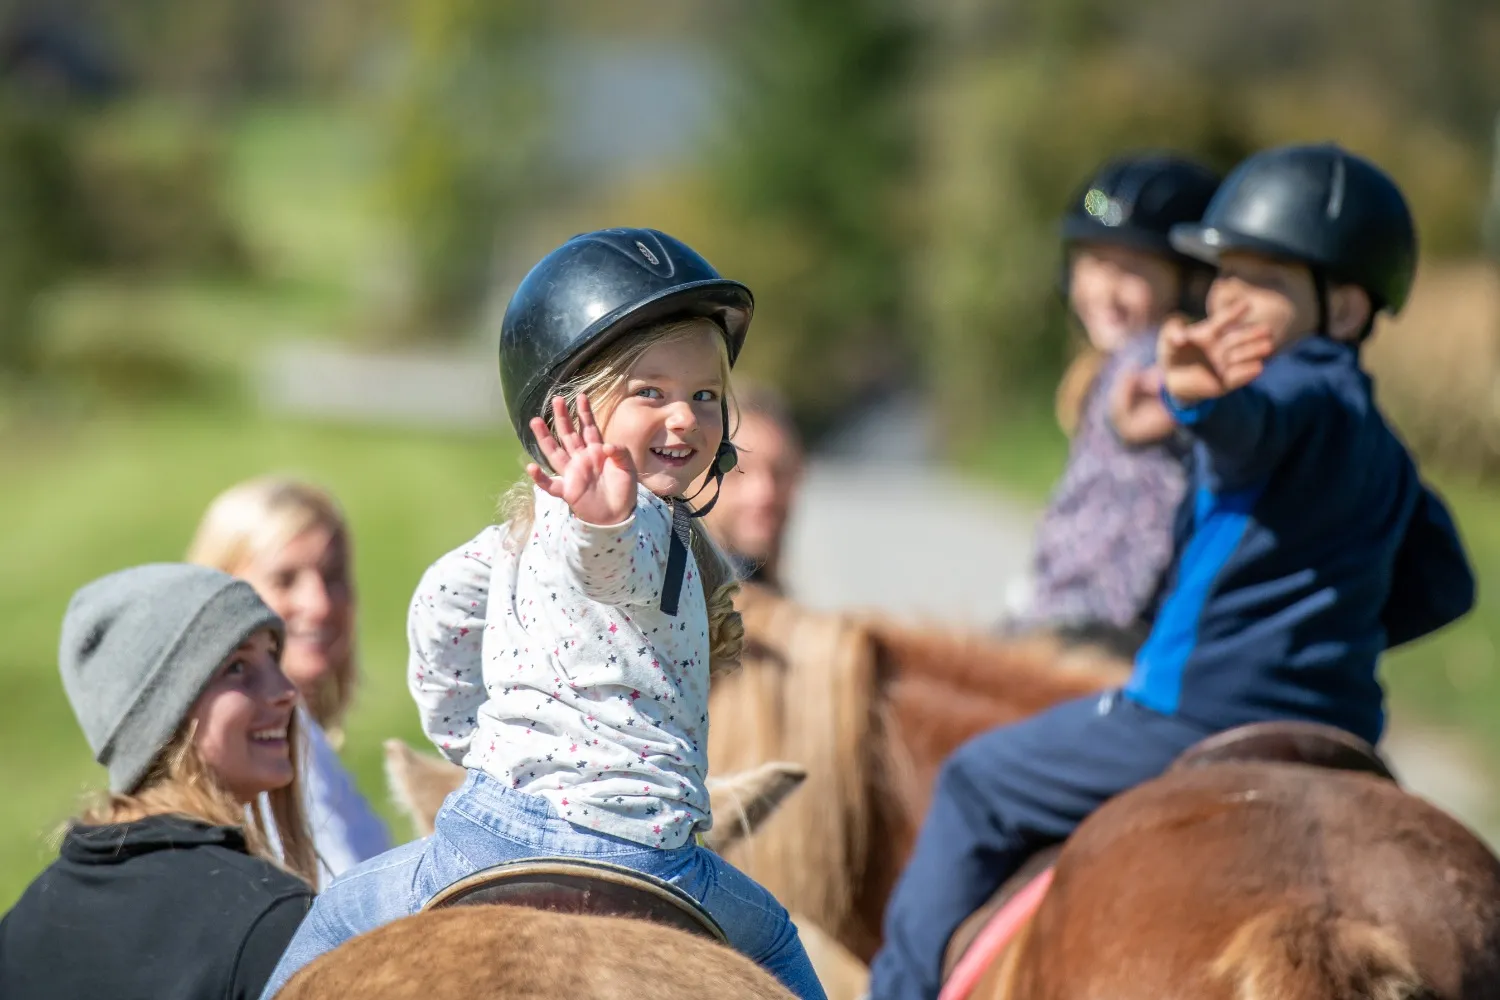 5 things children learn by being around horses